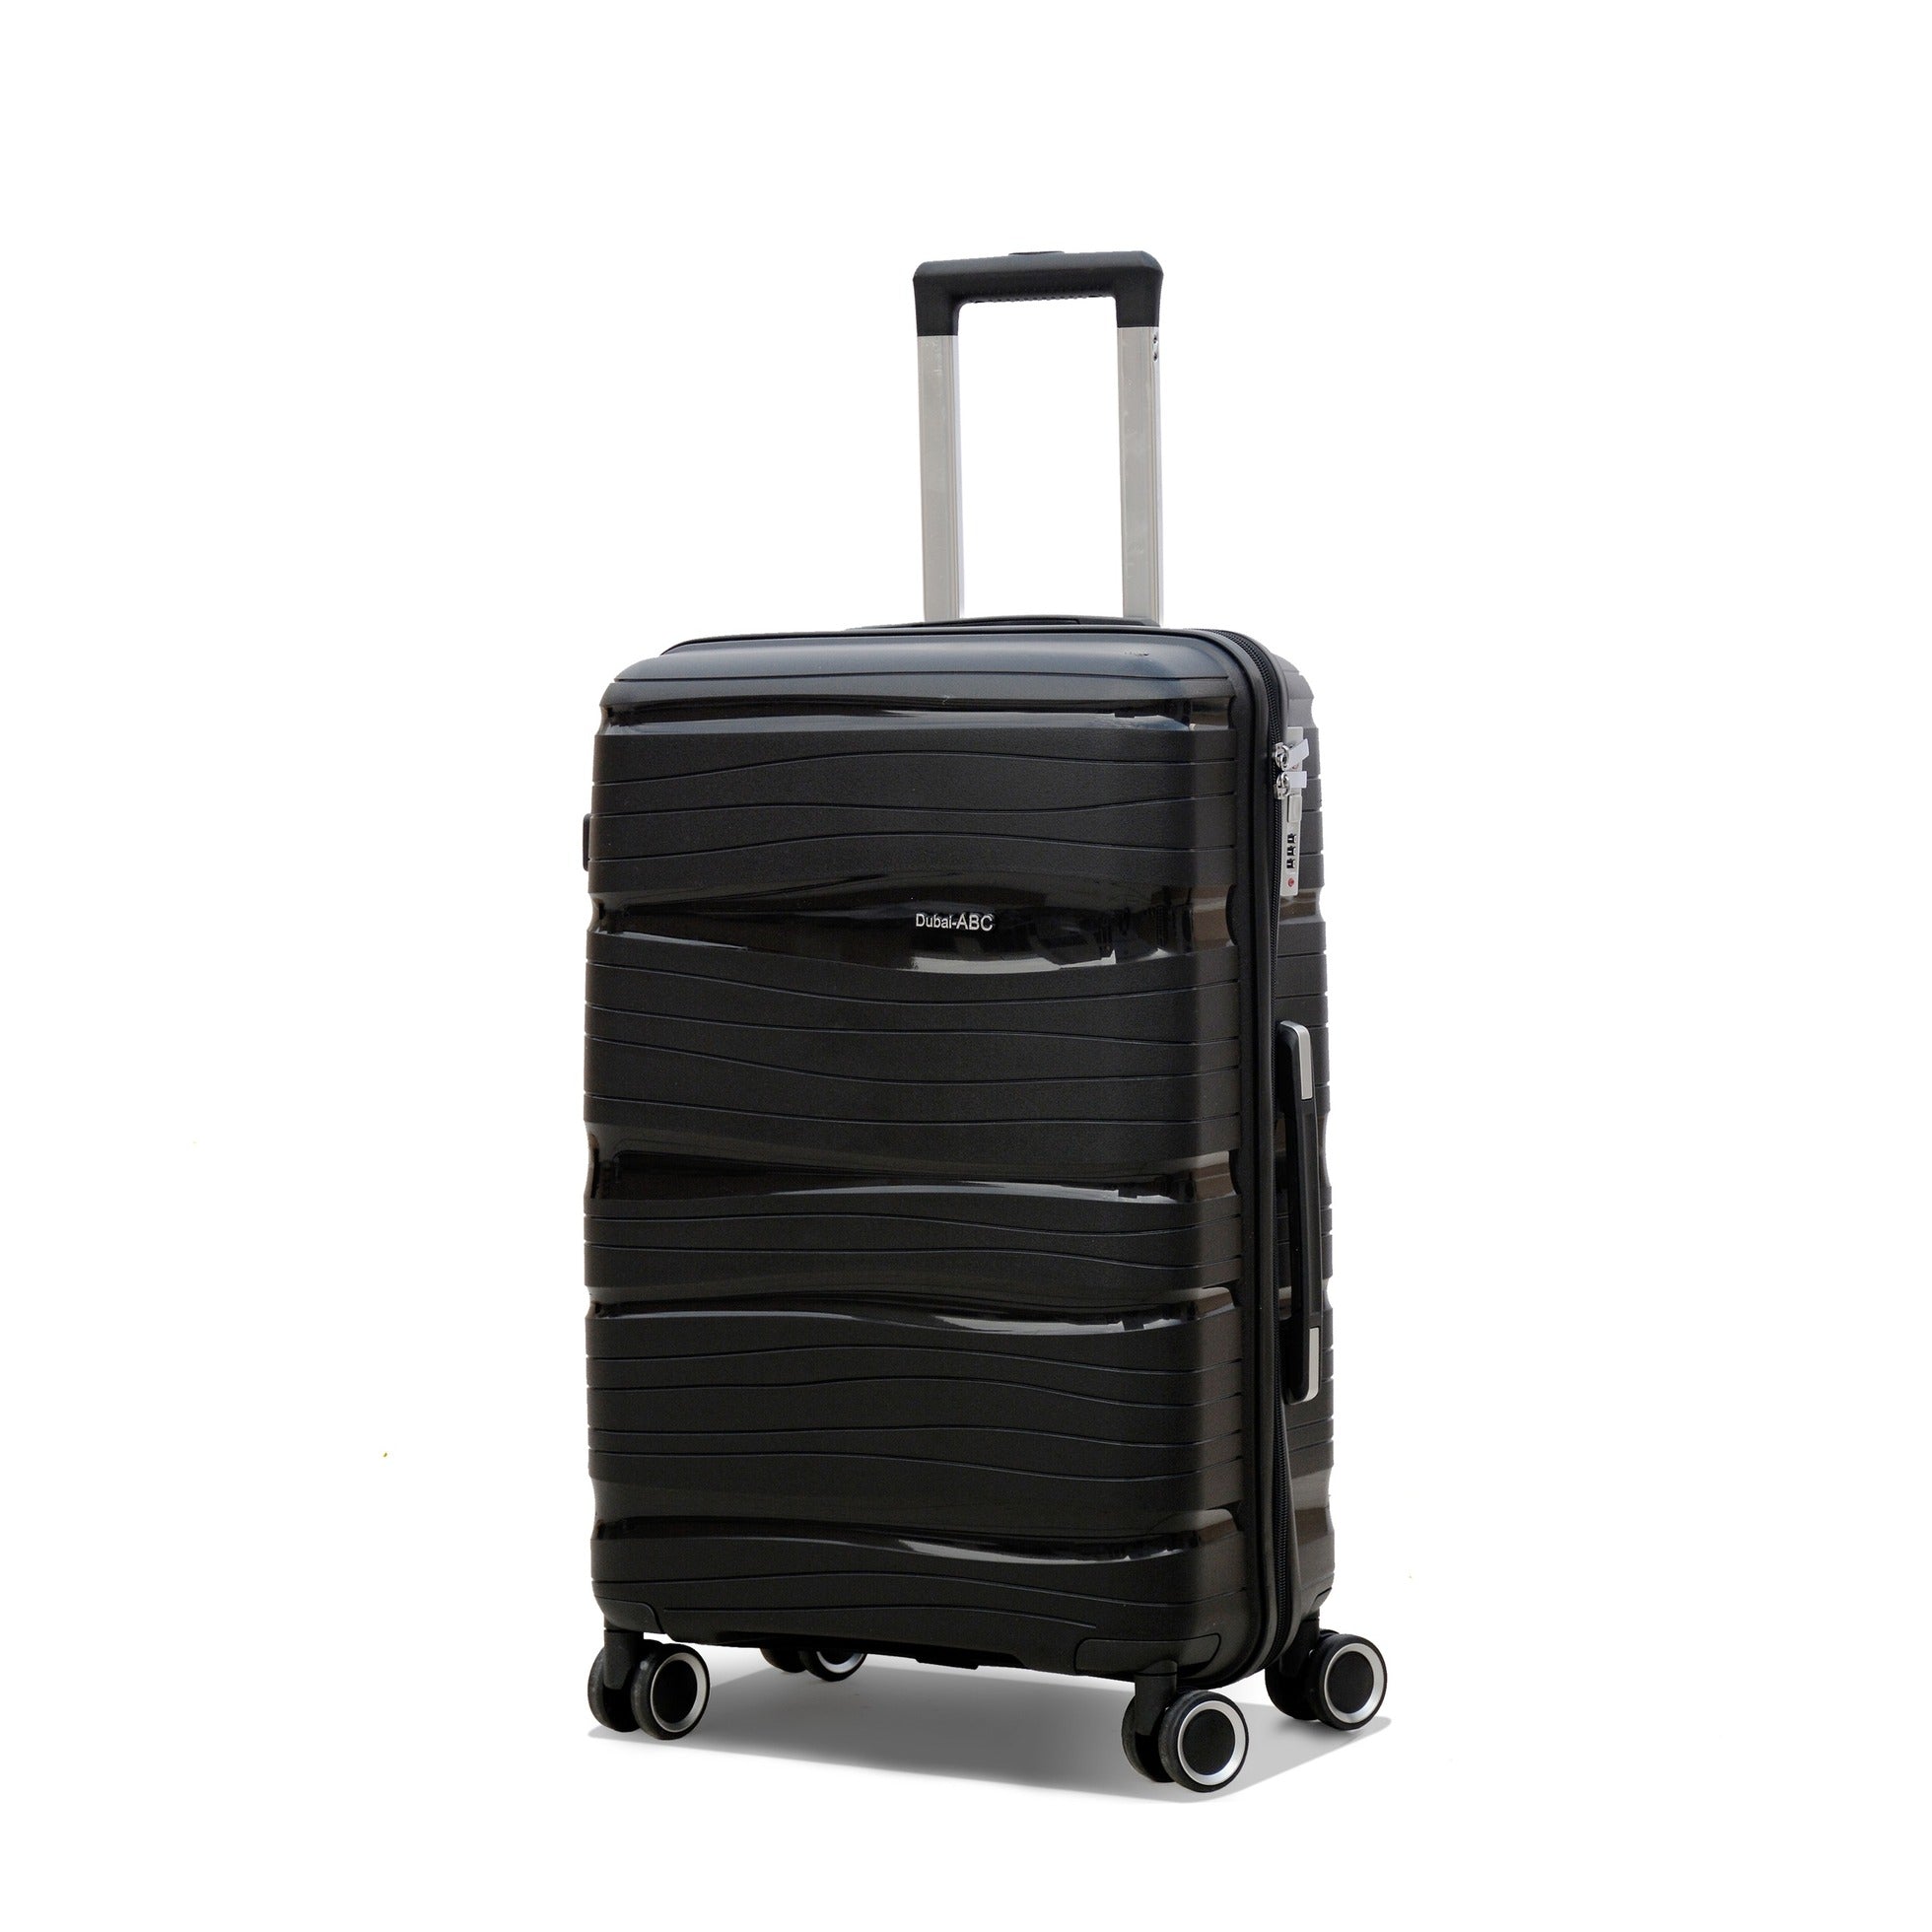 24" Black Colour Royal PP Luggage Lightweight Hard Case Trolley Bag With Double Spinner Wheel